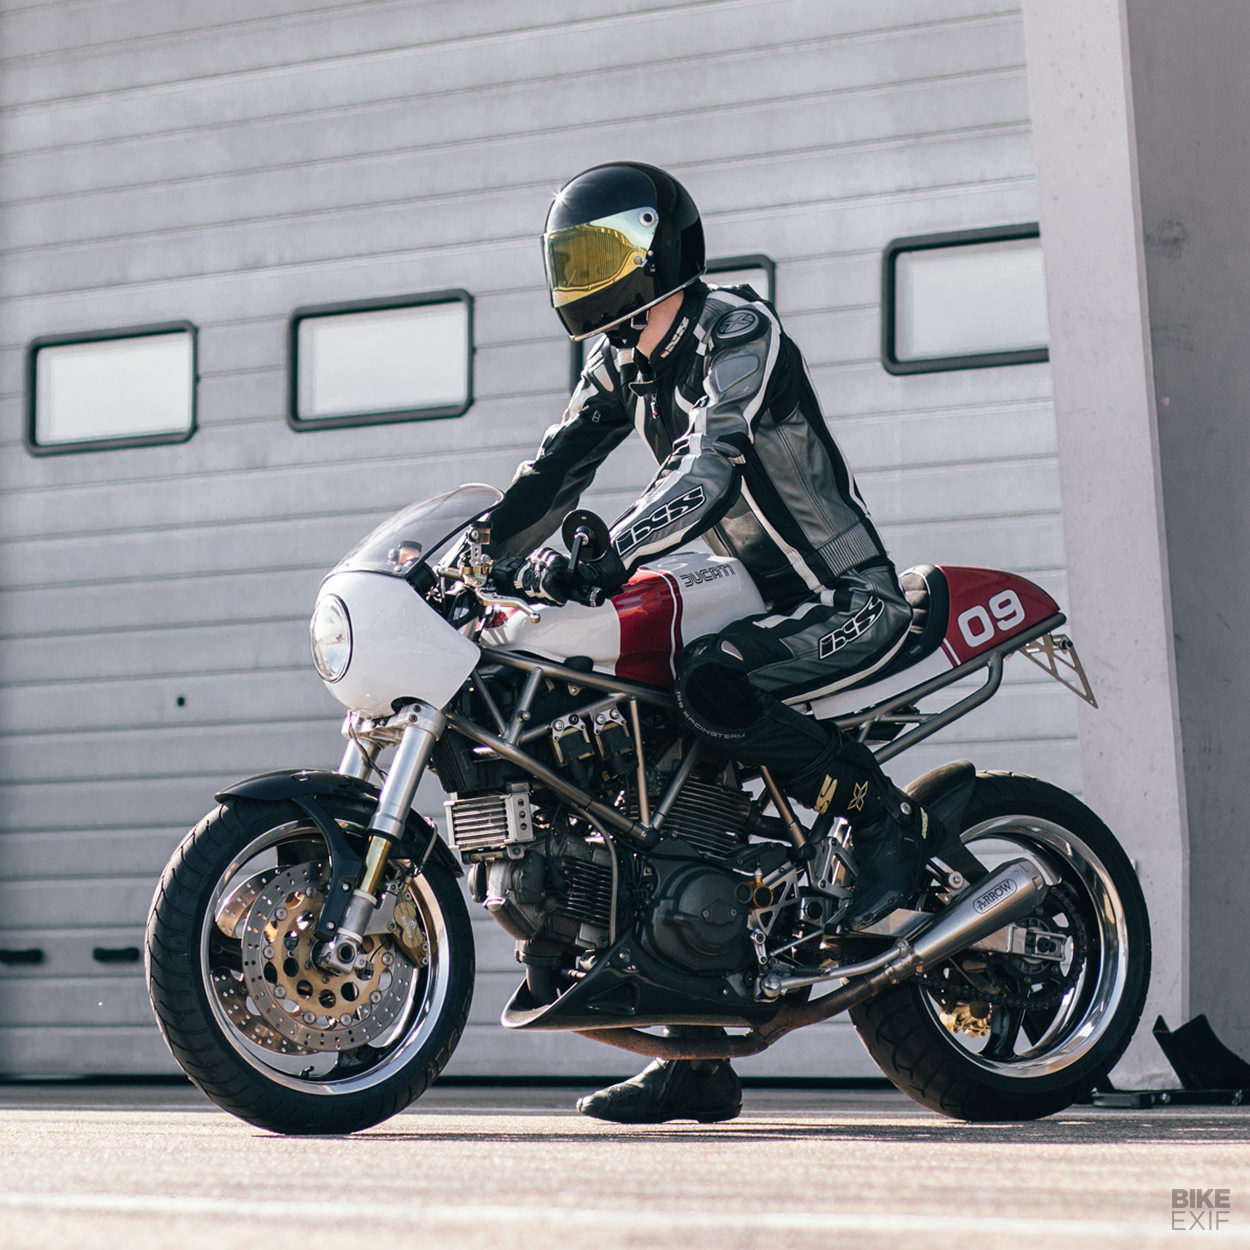 Ducati 750 Supersport cafe racer by Kaspeed